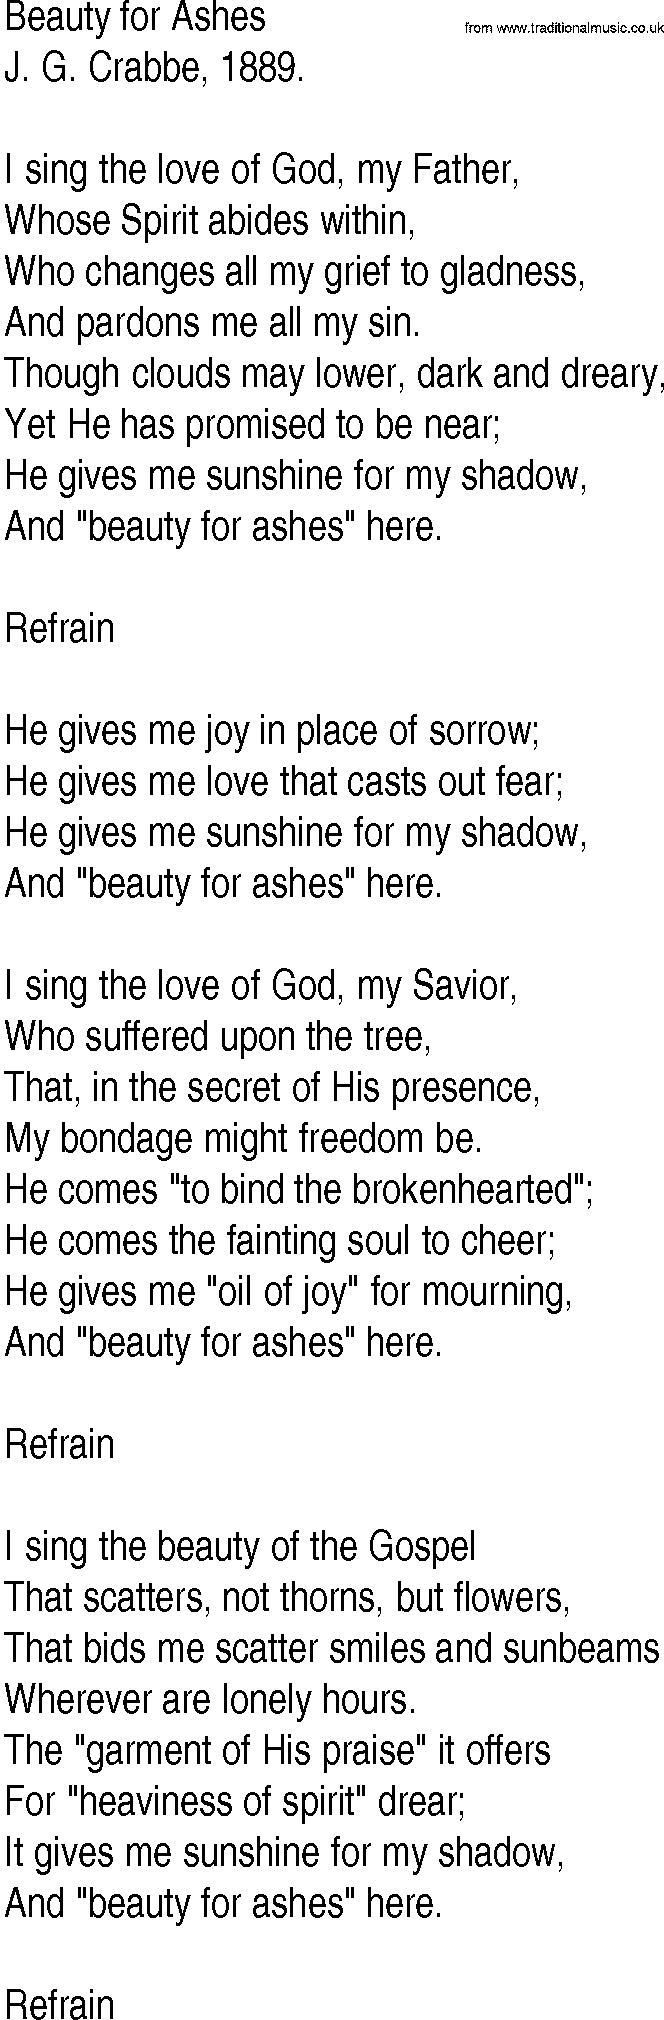 Hymn and Gospel Song: Beauty for Ashes by J G Crabbe lyrics